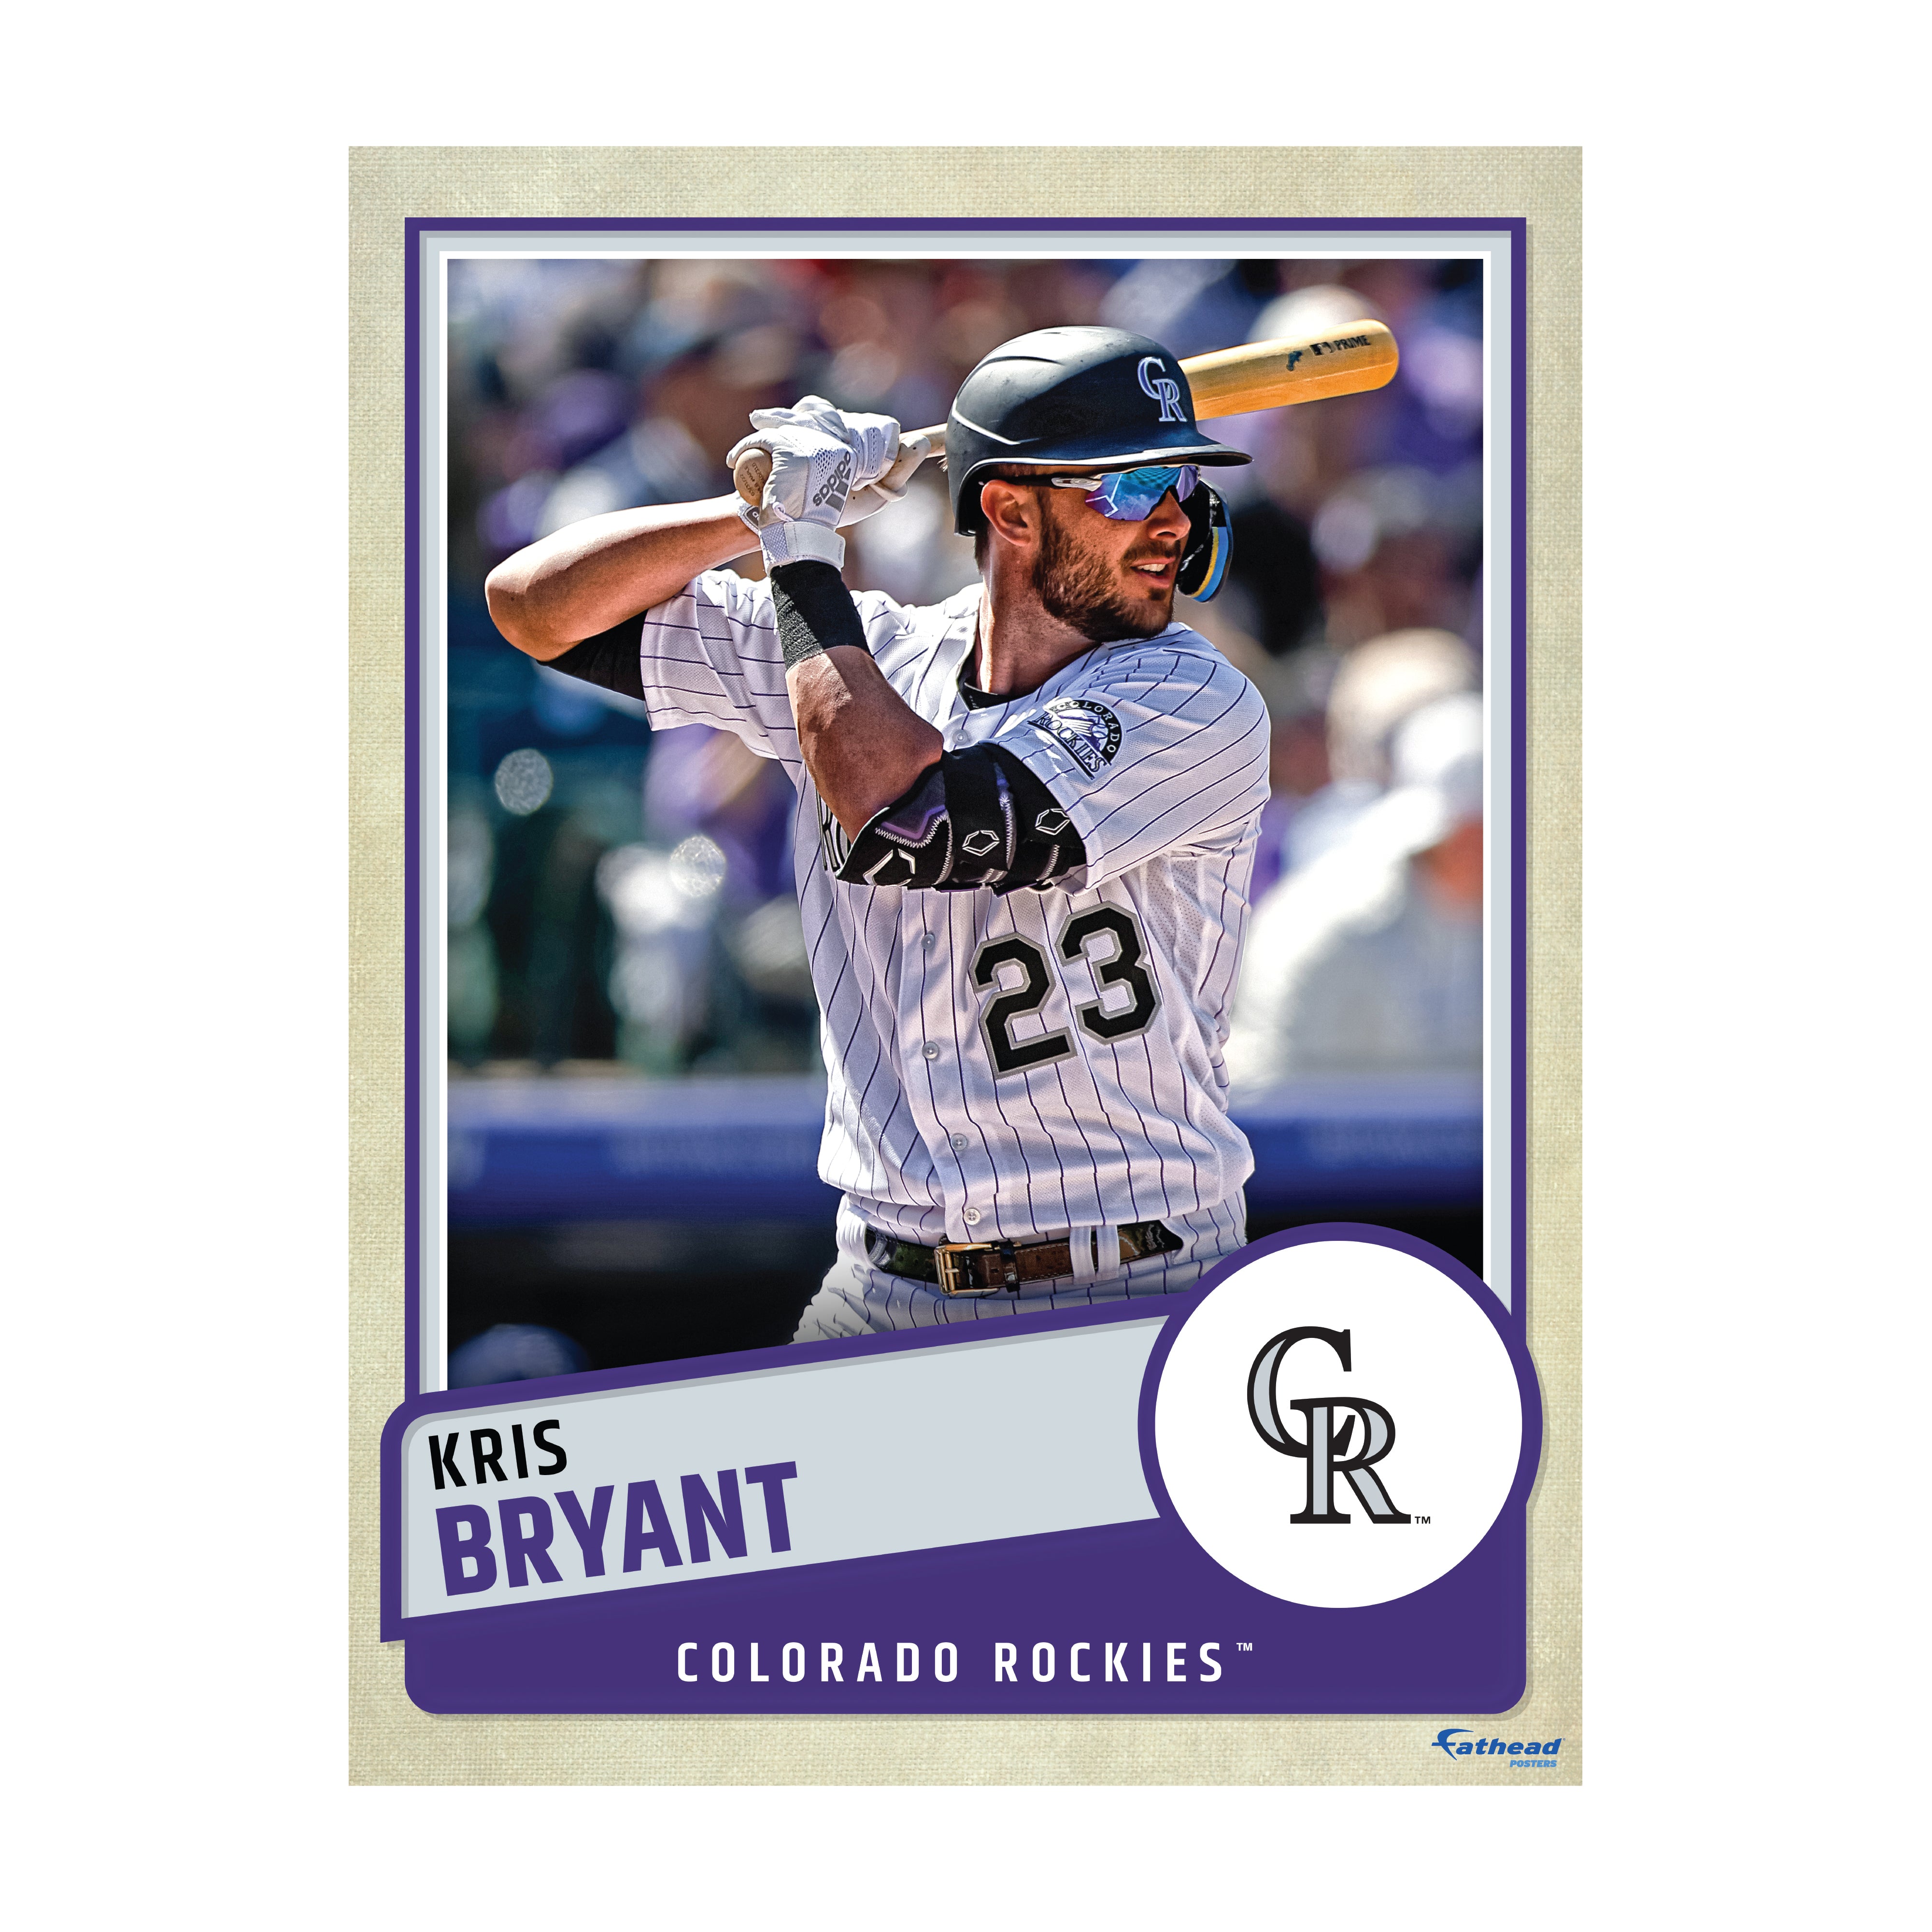 Colorado Rockies: Kris Bryant 2022 Poster - Officially Licensed